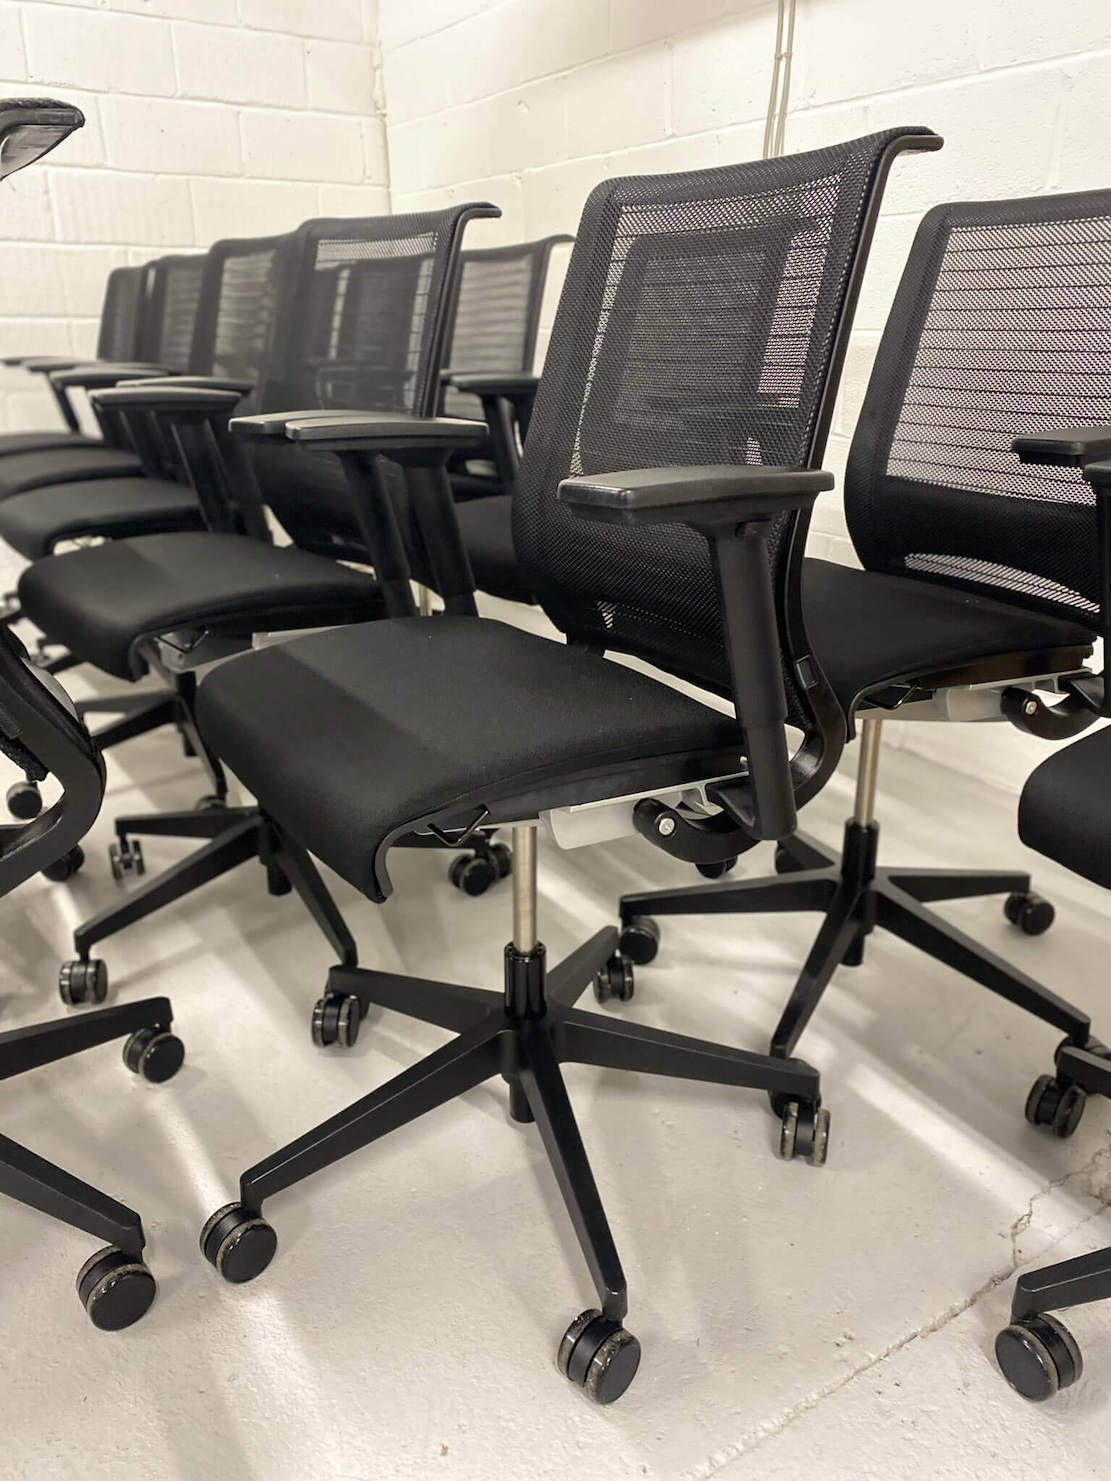 Steelcase think office chairs